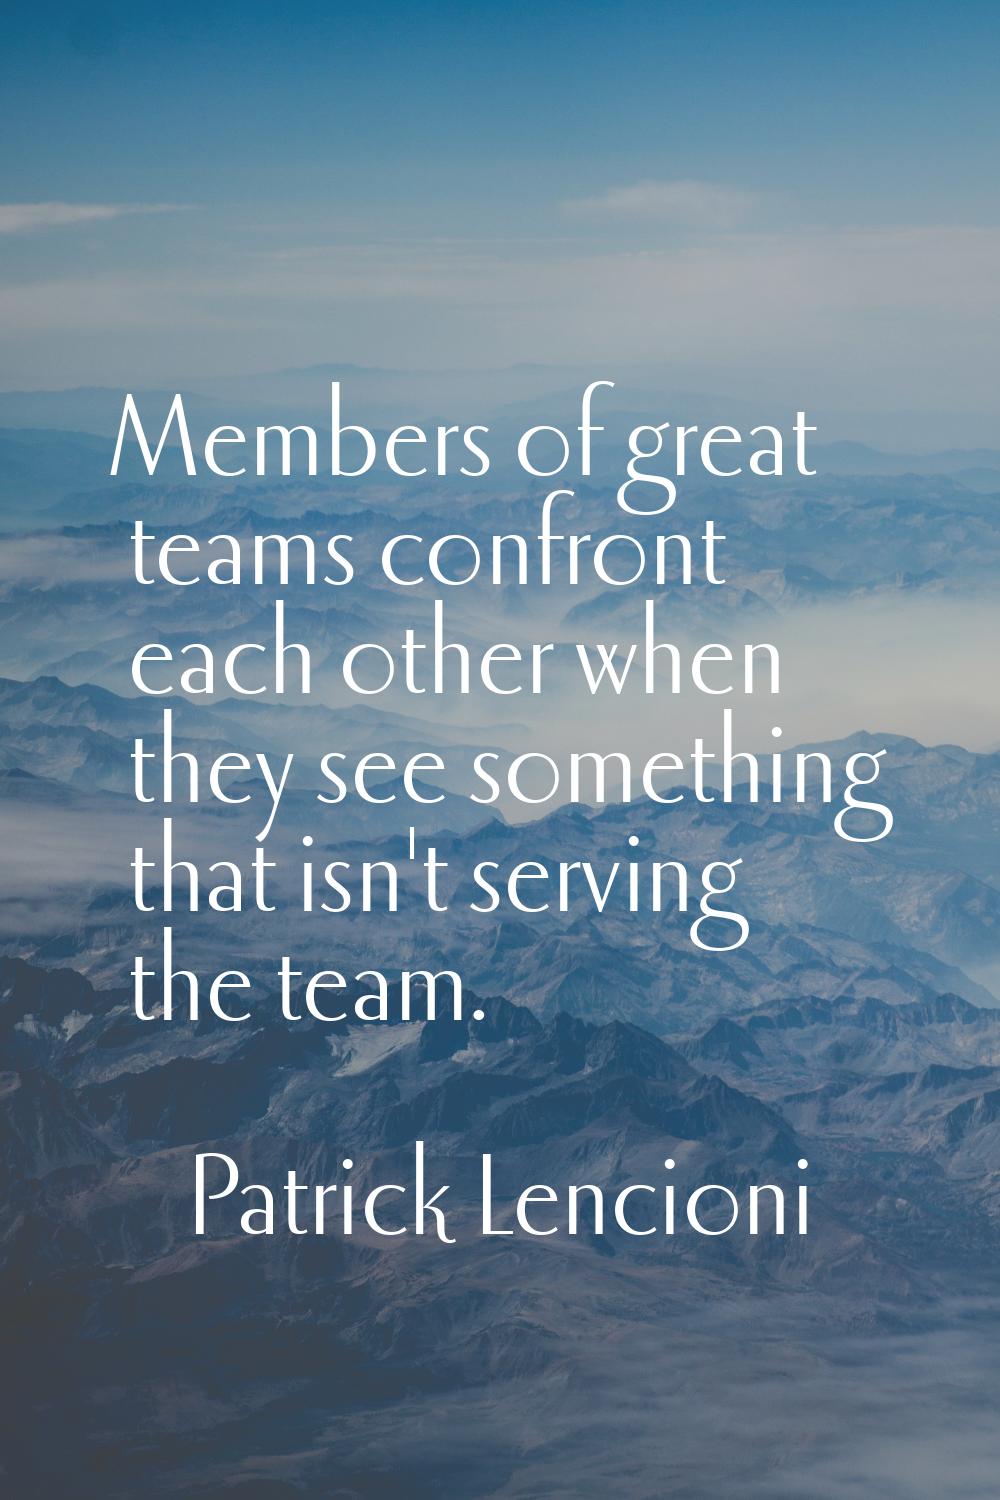 Members of great teams confront each other when they see something that isn't serving the team.